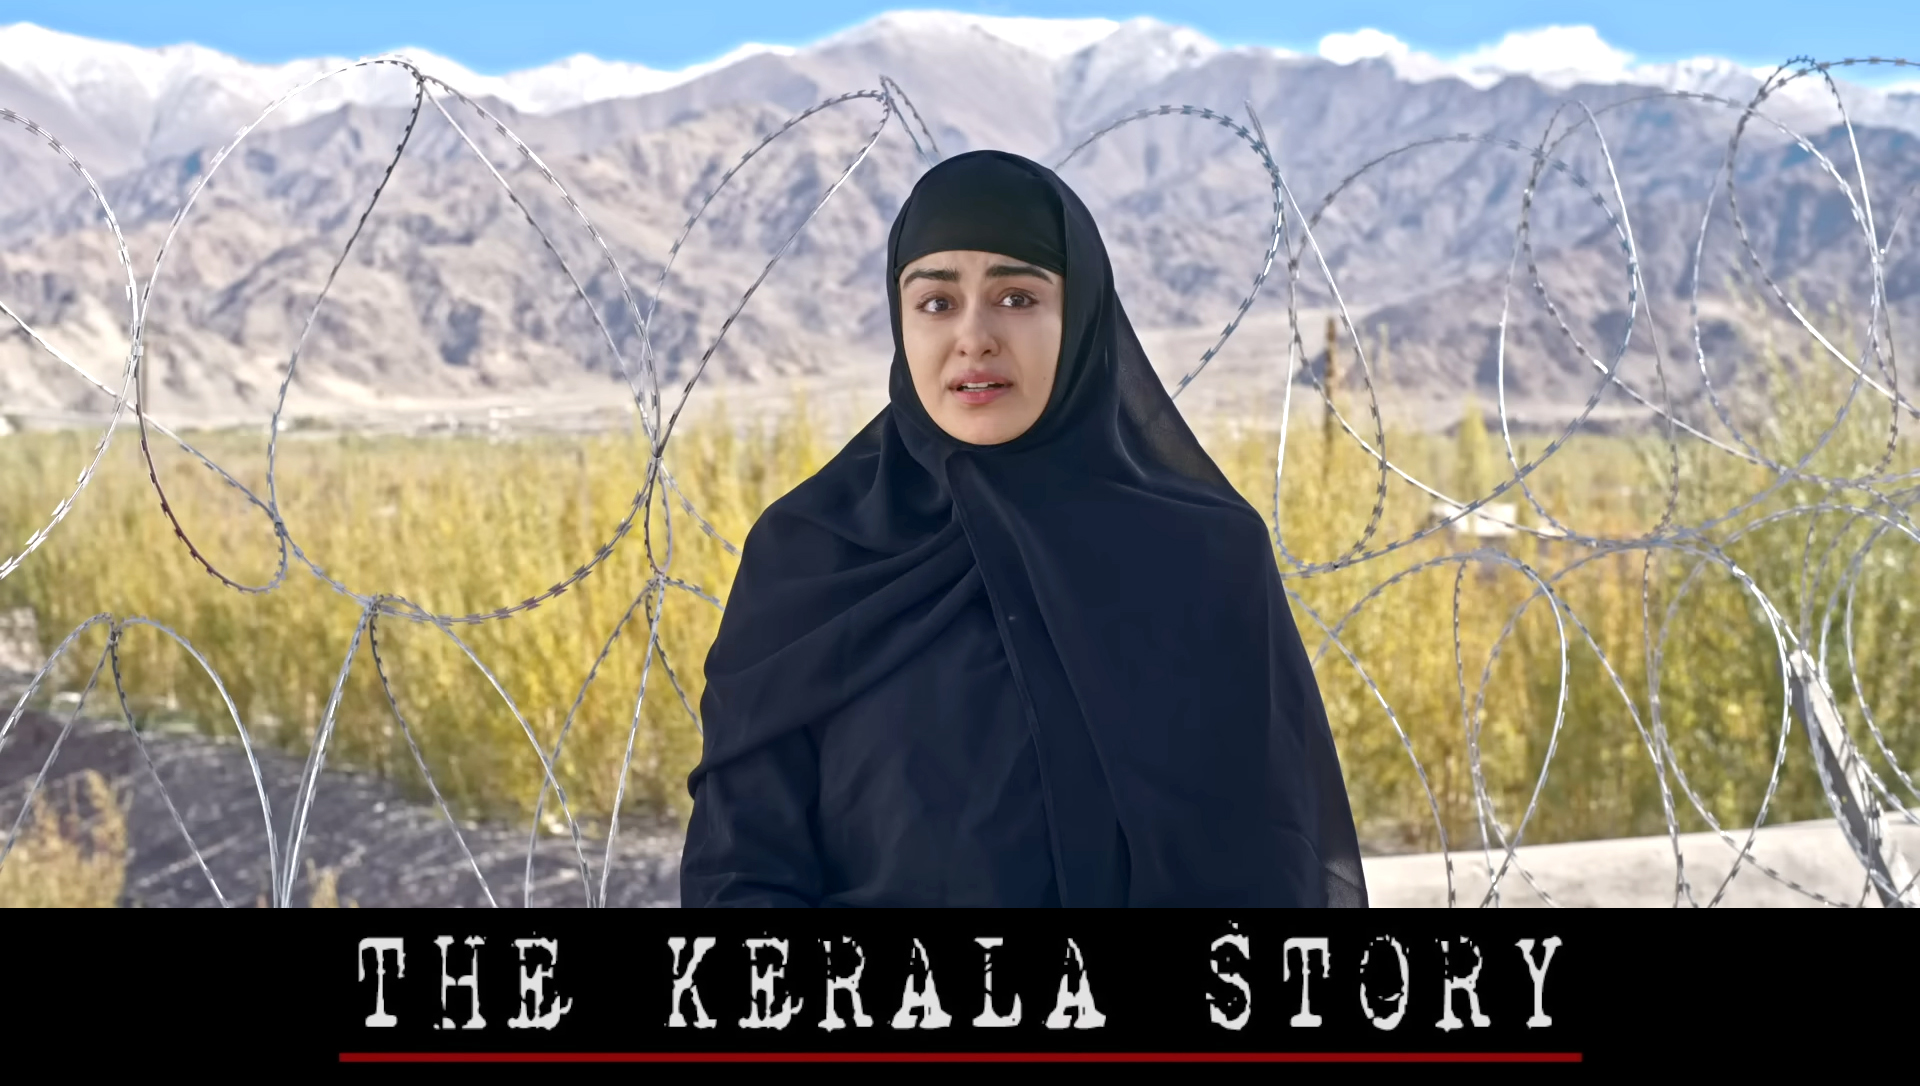 Teaser of The Kerala story released, talks about 32000 women who joined ISIS pic photo